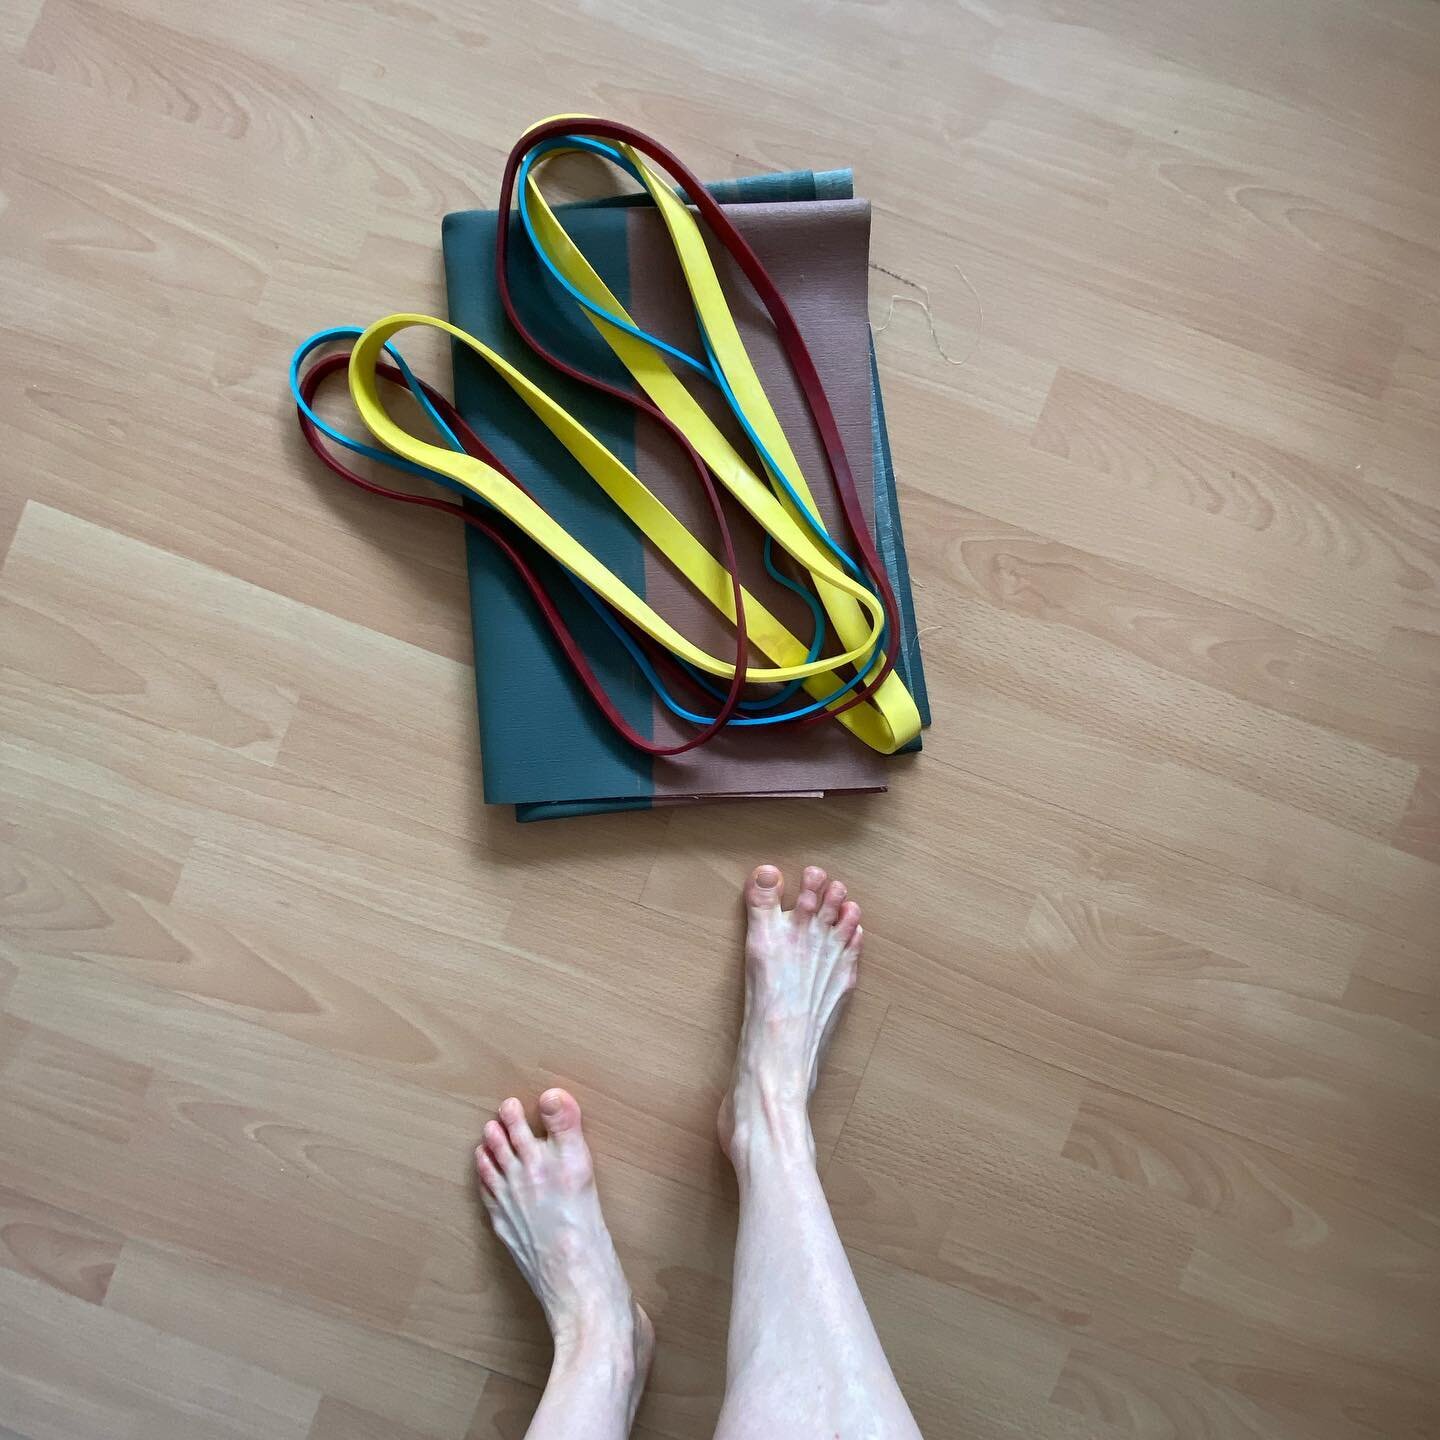 Resistance training using bands vs weights.
.
This weekend has been mostly writing a lot of words. However, between words I have been able to get in a couple of workouts using my home toolkit ➡️ 5kg, 15kg and 25kg resistance bands.
.
A scoping review